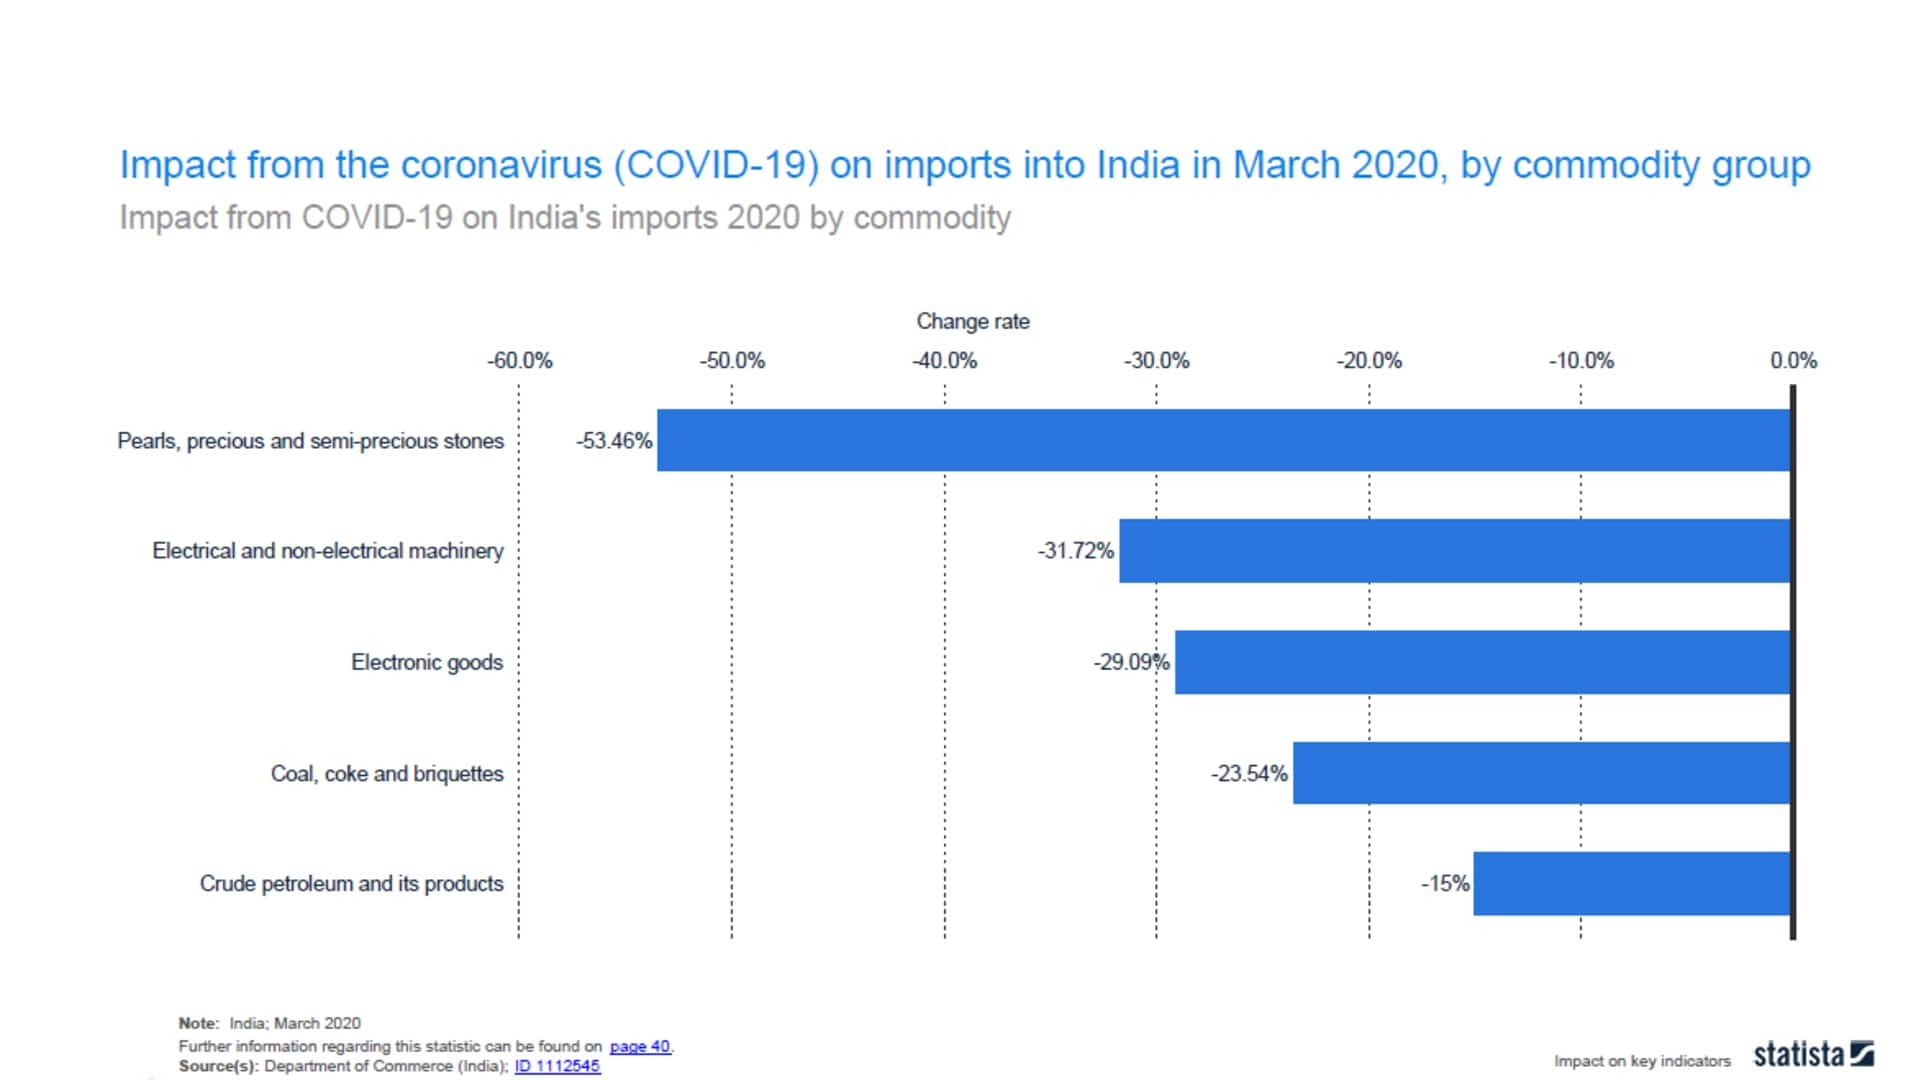 https://images.moneycontrol.com/static-mcnews/2020/05/4.-Impact-from-the-coronavirus-COVID-19-on-imports-into-India-in-March-2020-by-commodity-group.jpg